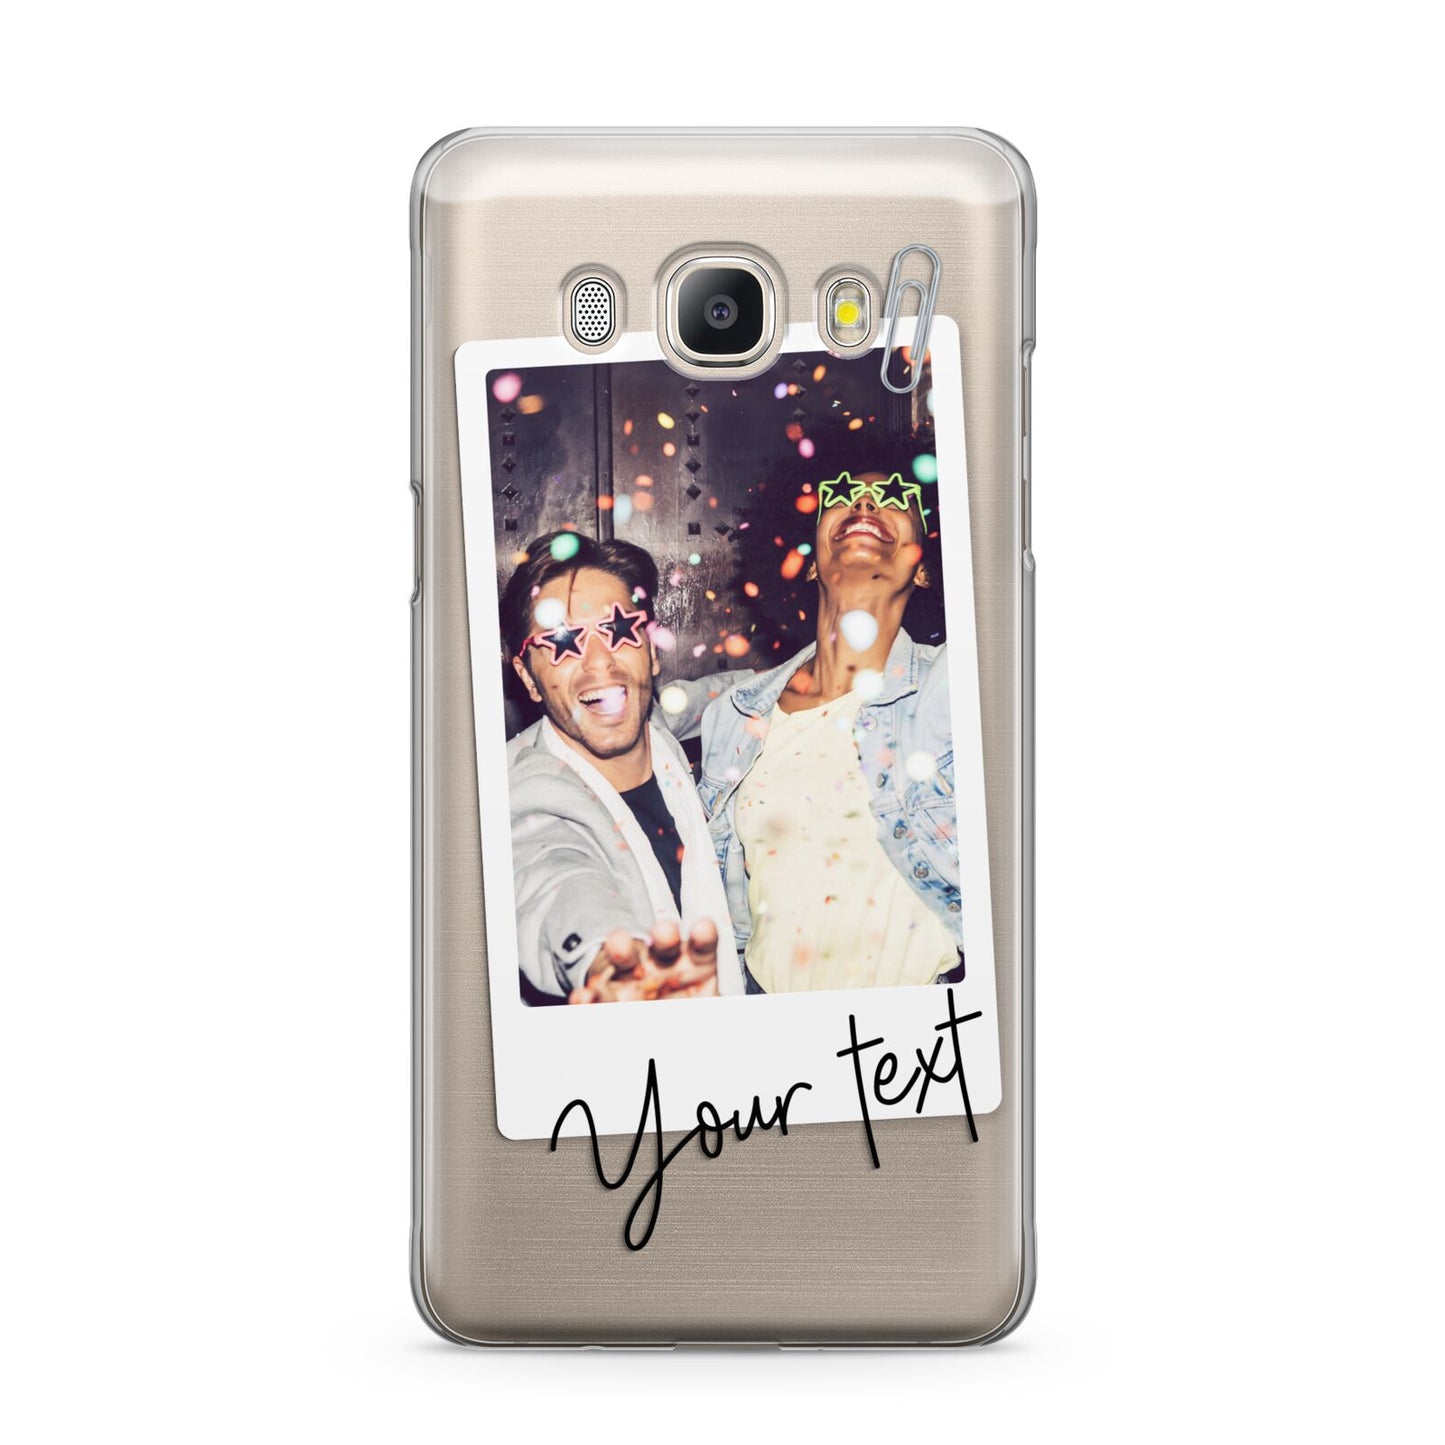 Personalised Photo with Text Samsung Galaxy J5 2016 Case